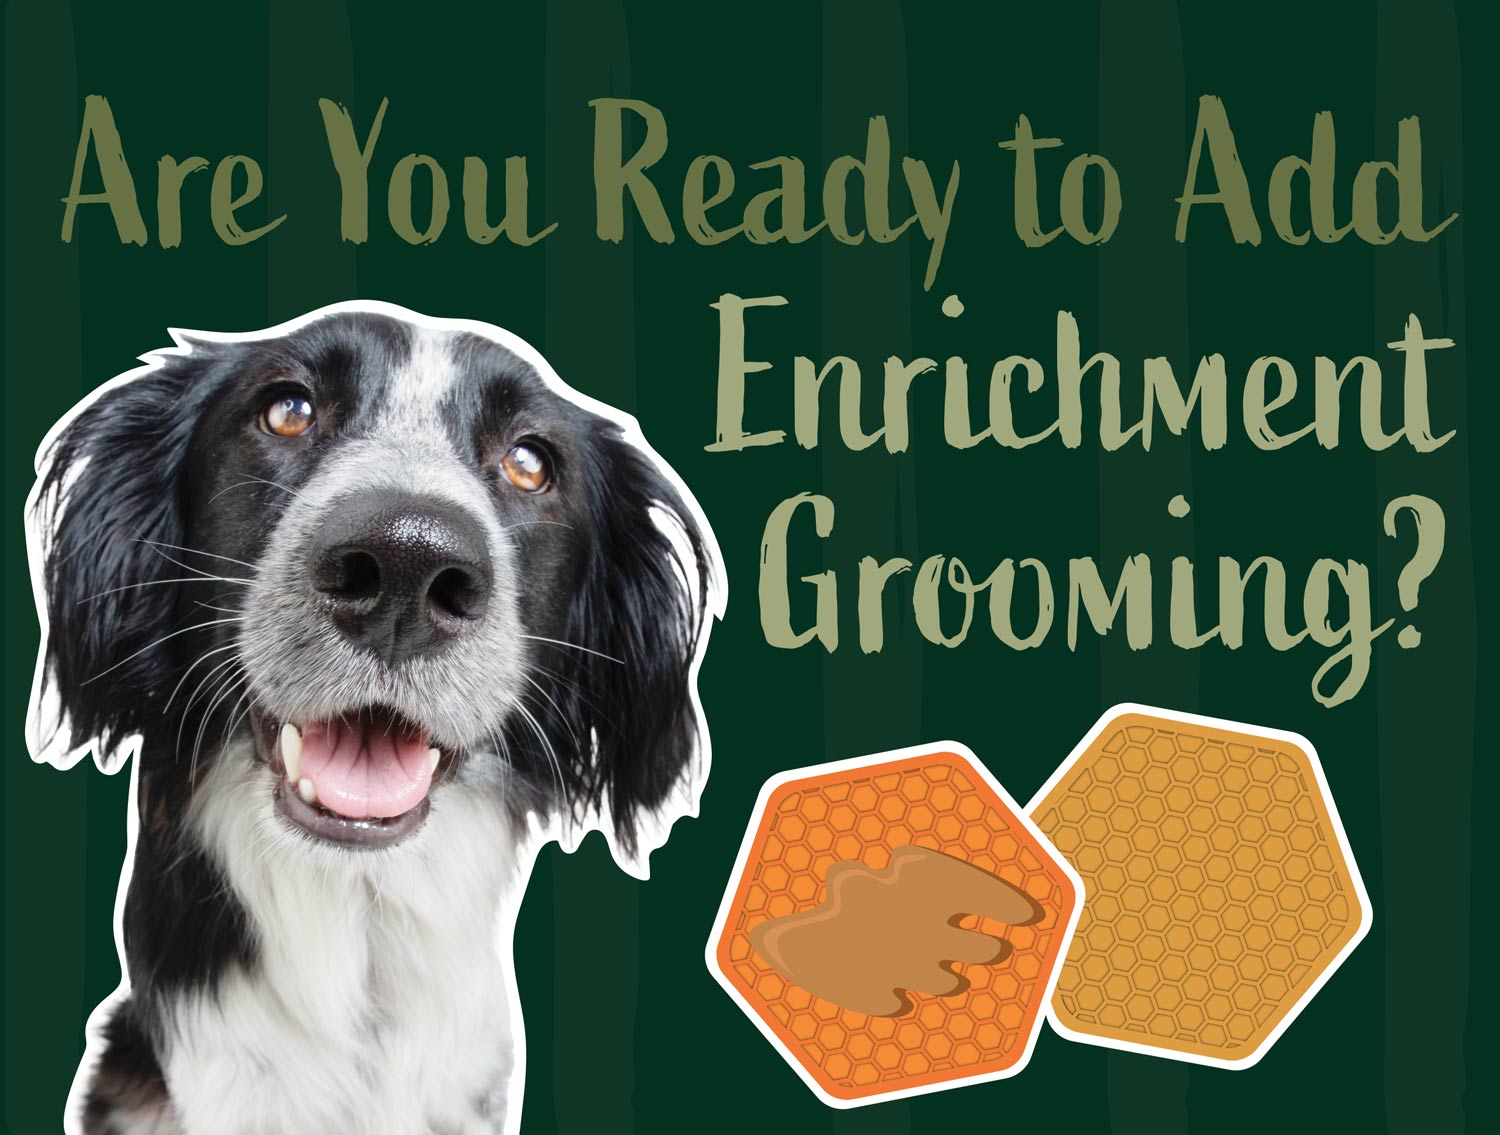 Are you ready to add enrichment grooming? title typography